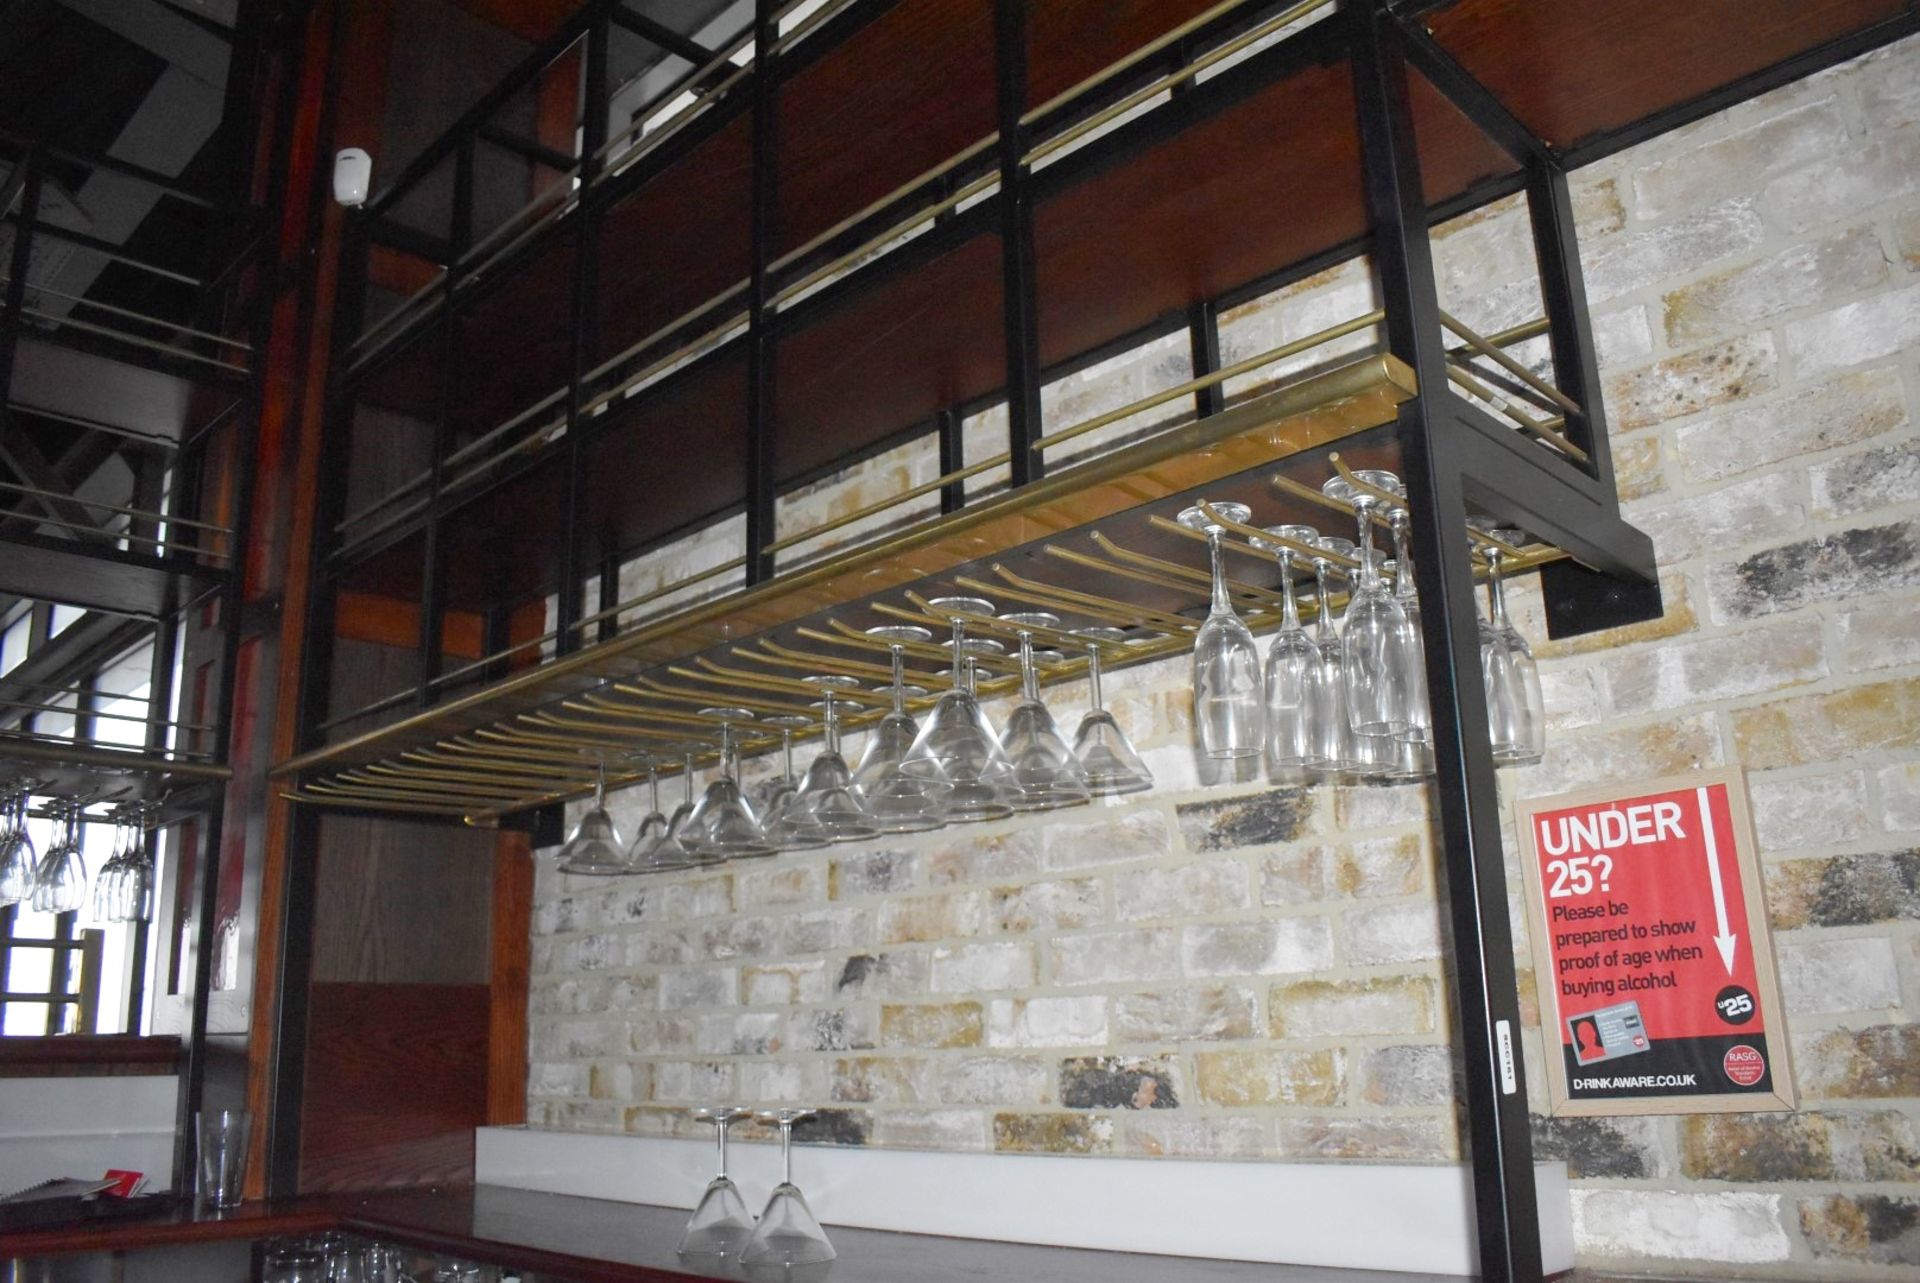 1 x Back Bar Wine Bottle Display and Glass Holder Unit With Wine Glass Hangers - Approx 14ft Length - Image 8 of 21